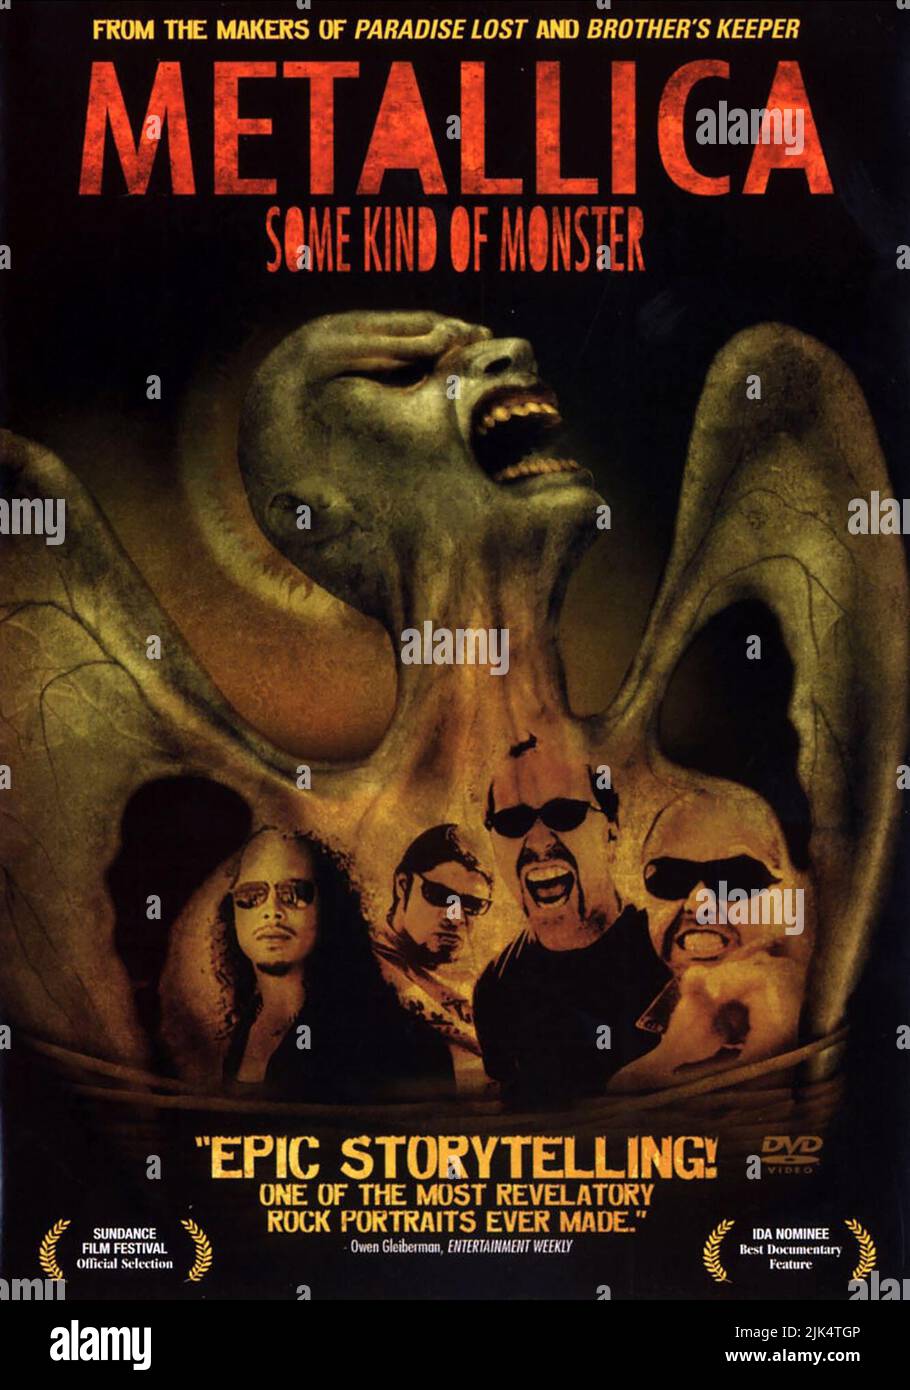 MOVIE POSTER, METALLICA: SOME KIND OF MONSTER, 2004 Stock Photo